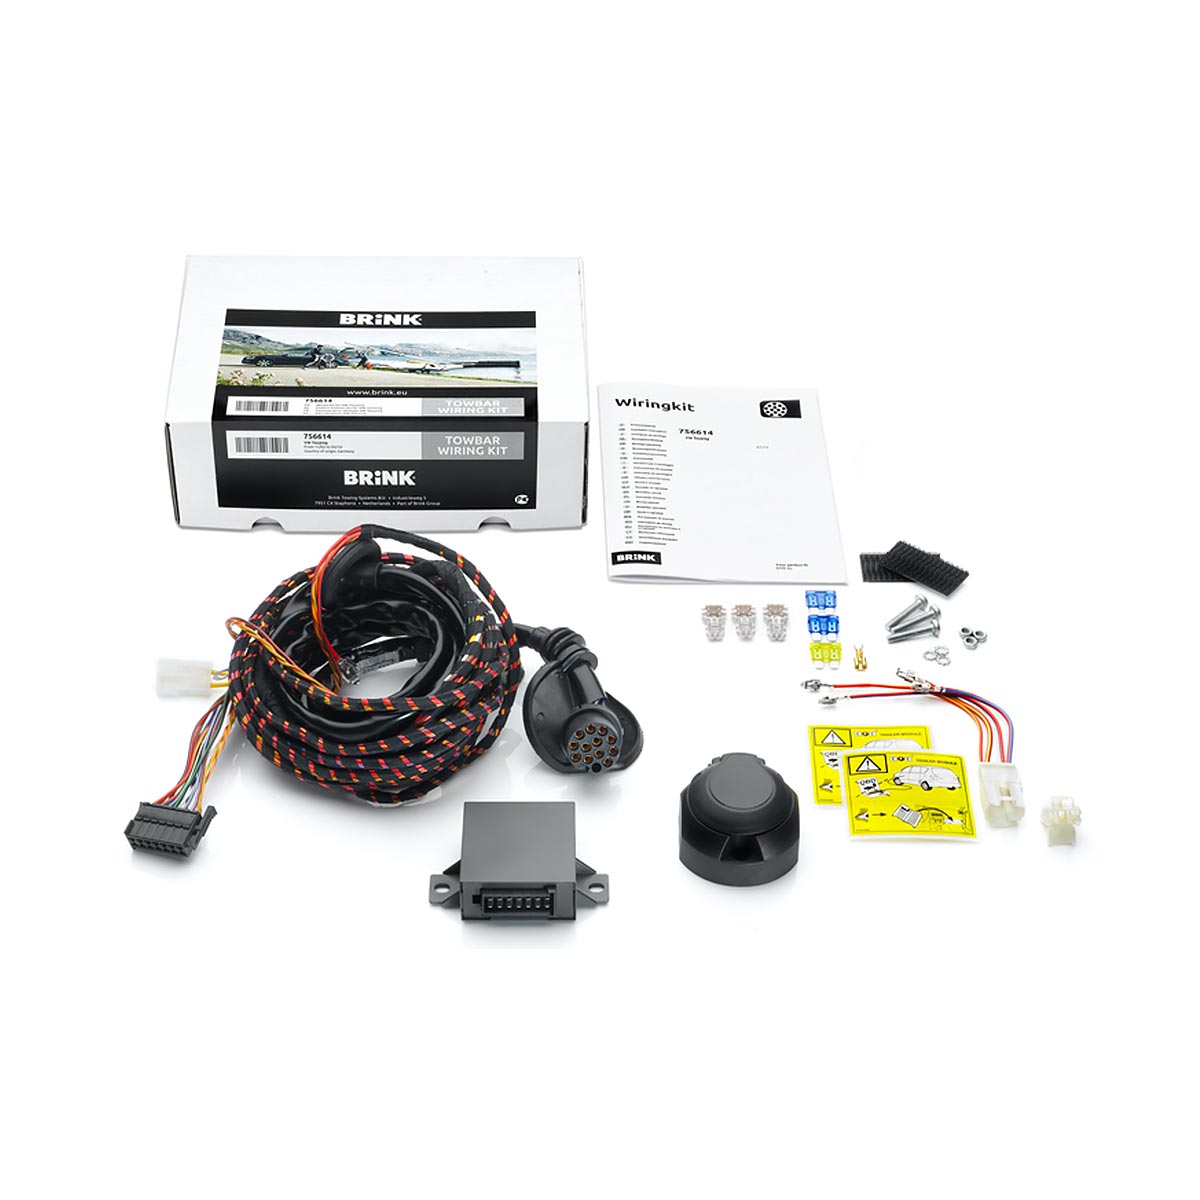 VW Tiguan Brink 21500623 Vehicle-Specific 13-Pin Wiring Kit for Audi Q3 